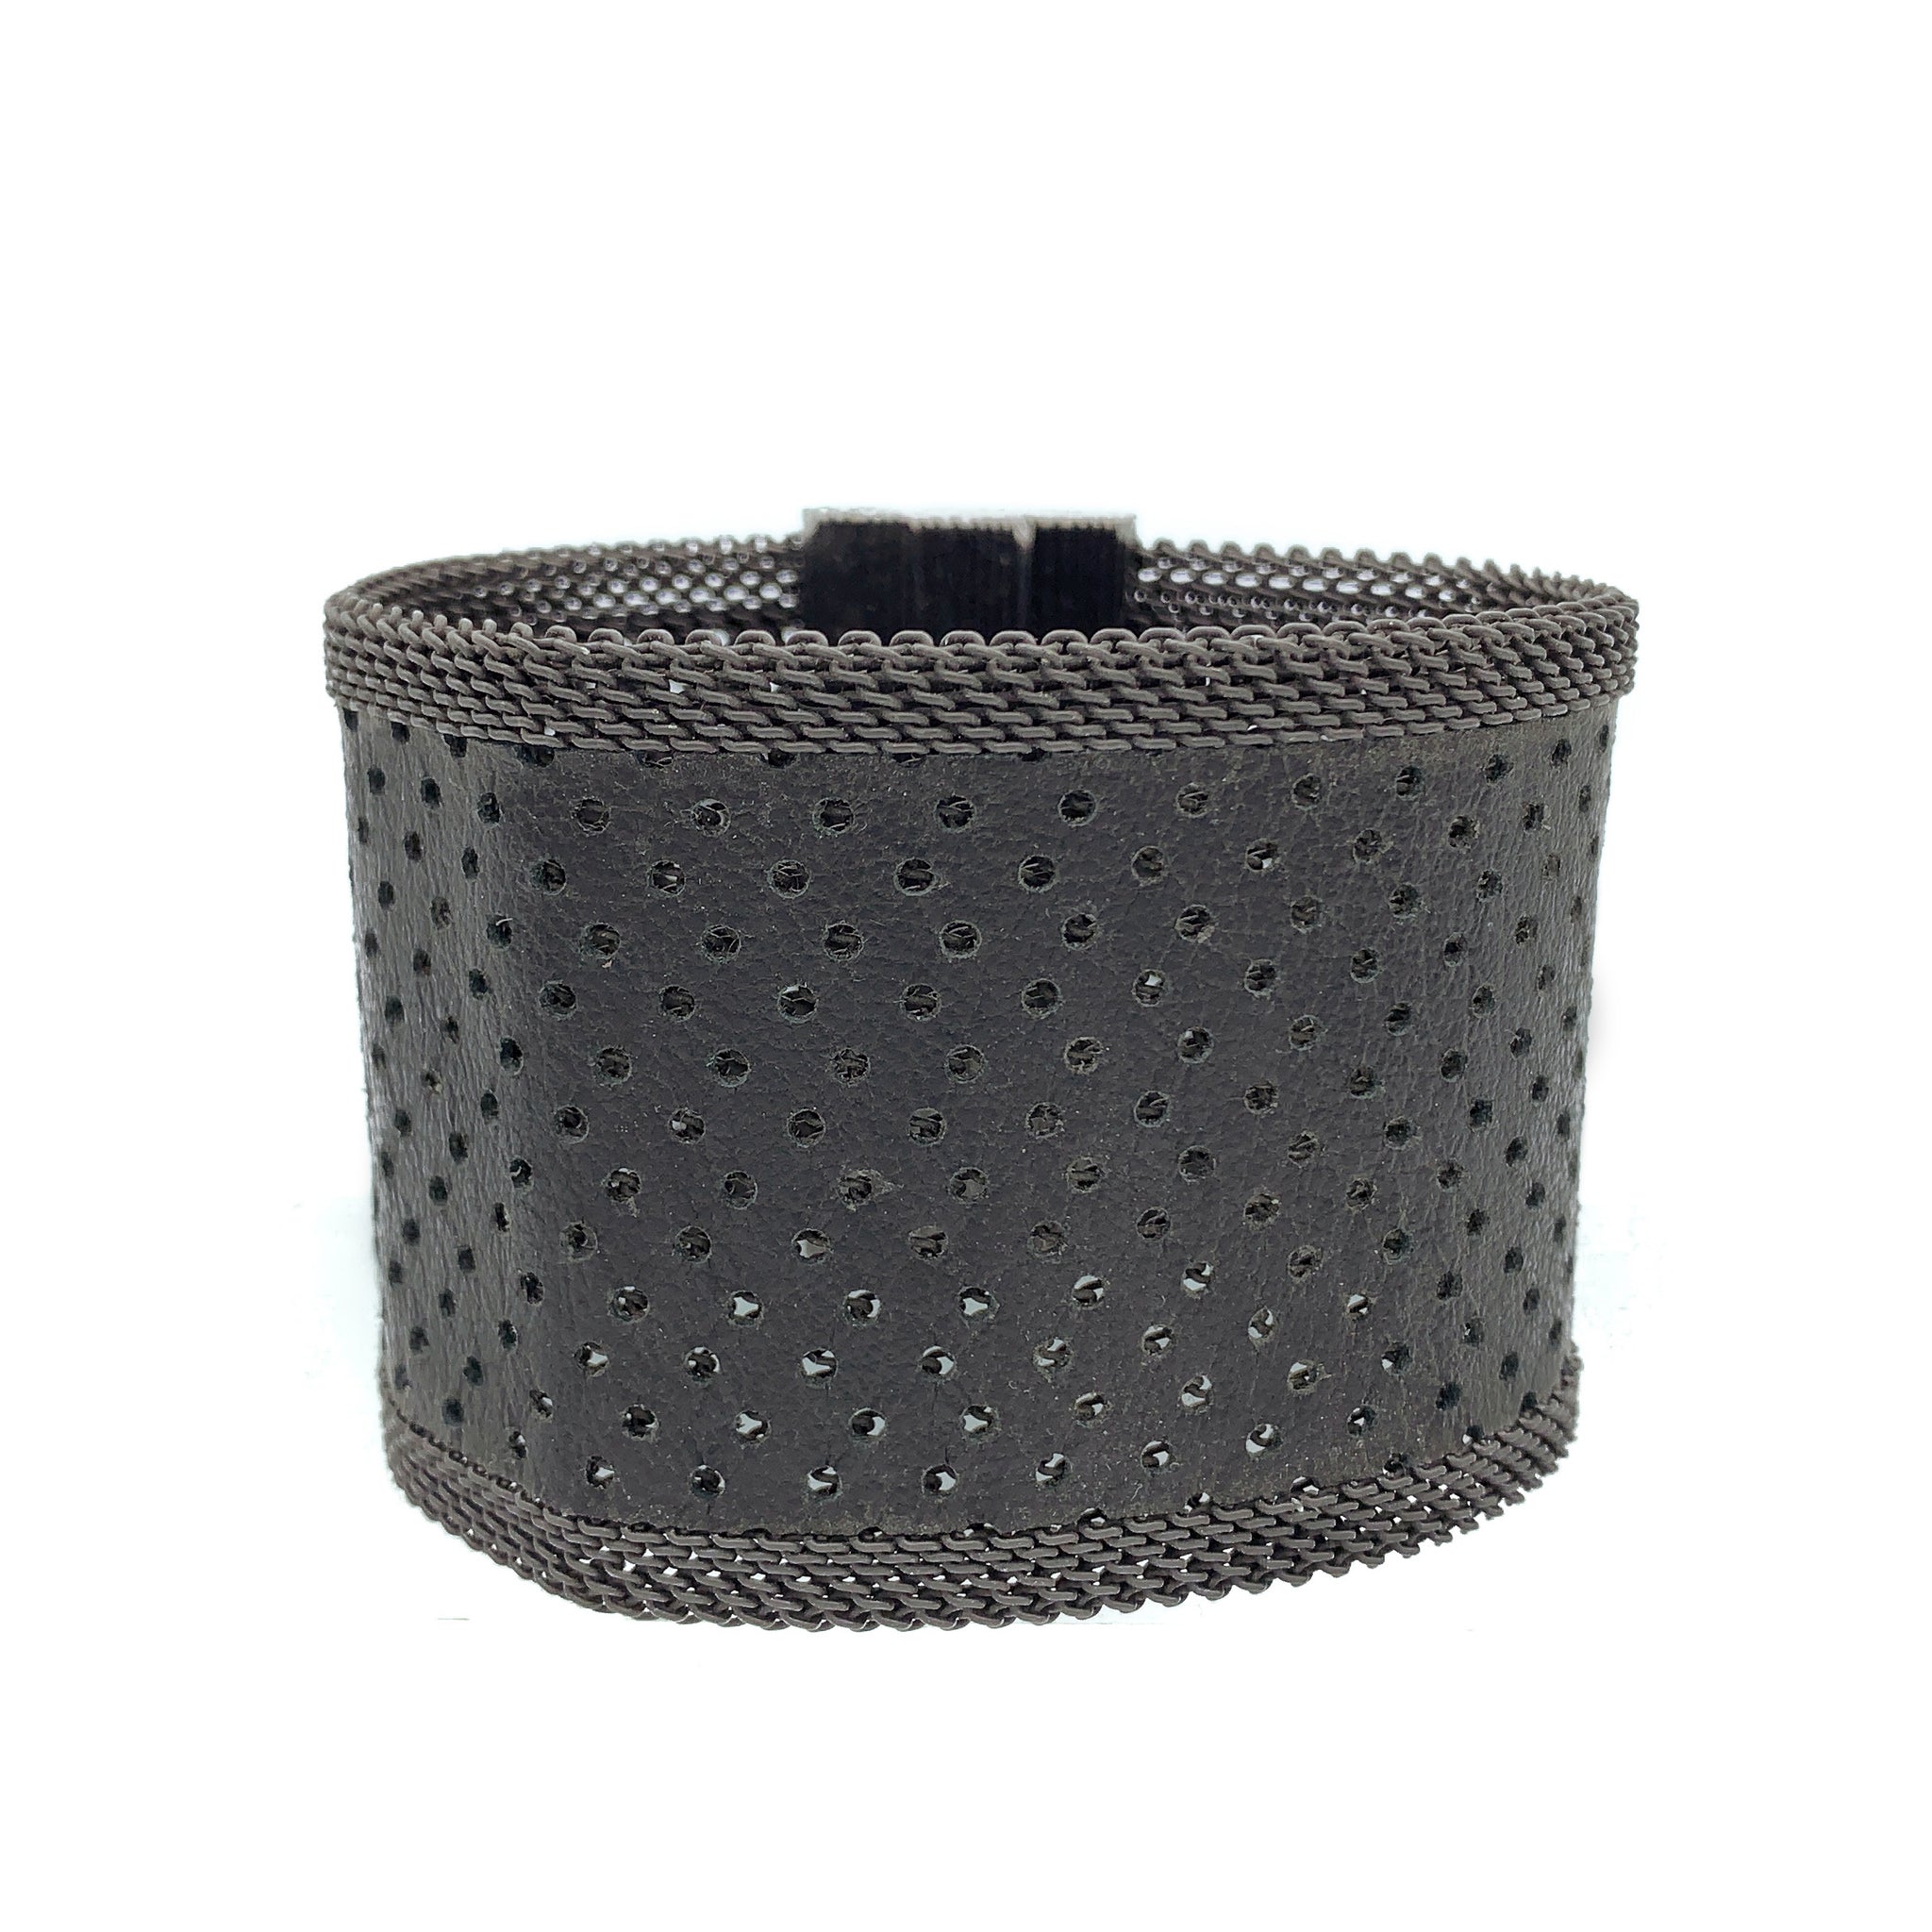 Men's Wide Black Perforated Leather Cuff